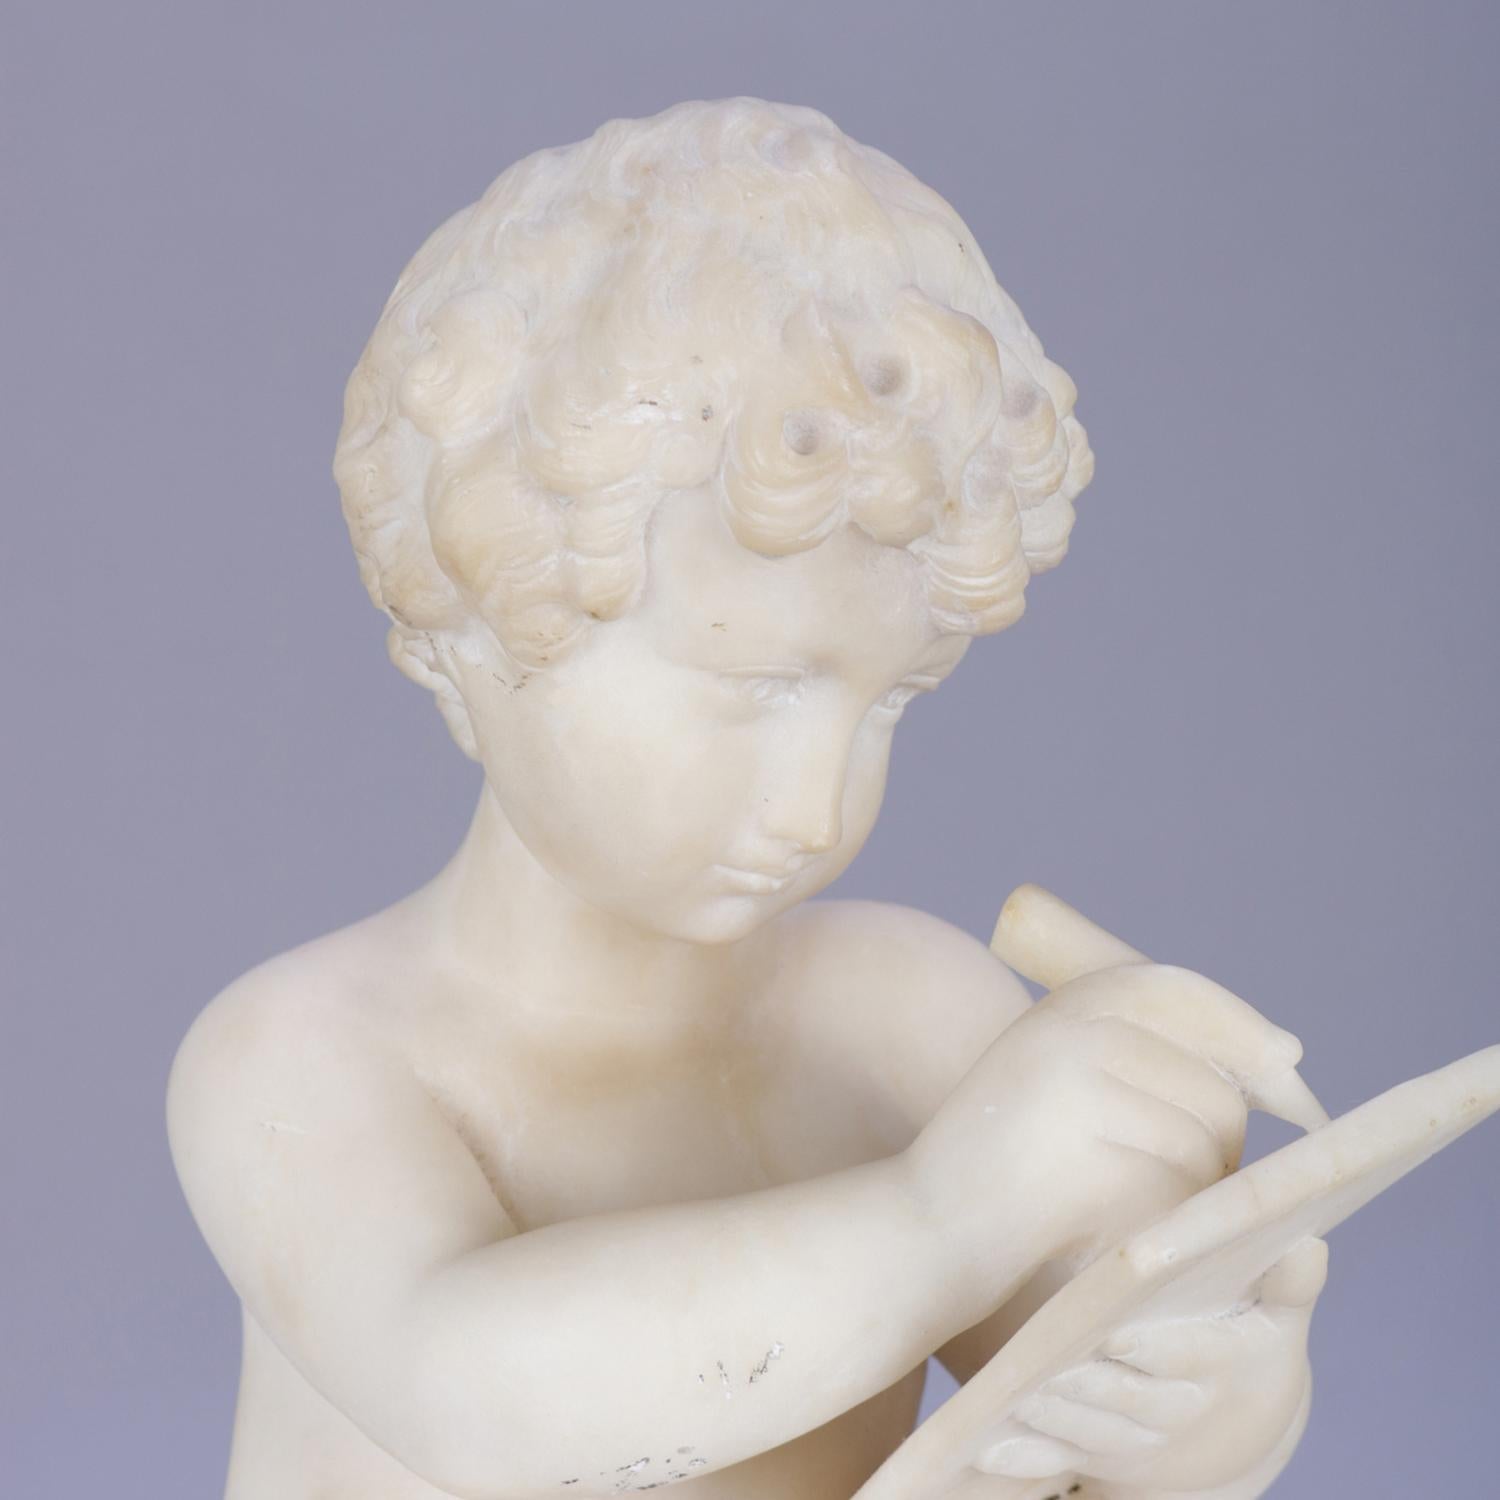 19th Century Classical Italian Carved Alabaster Figural Sculpture of a Child Poet, circa 1890